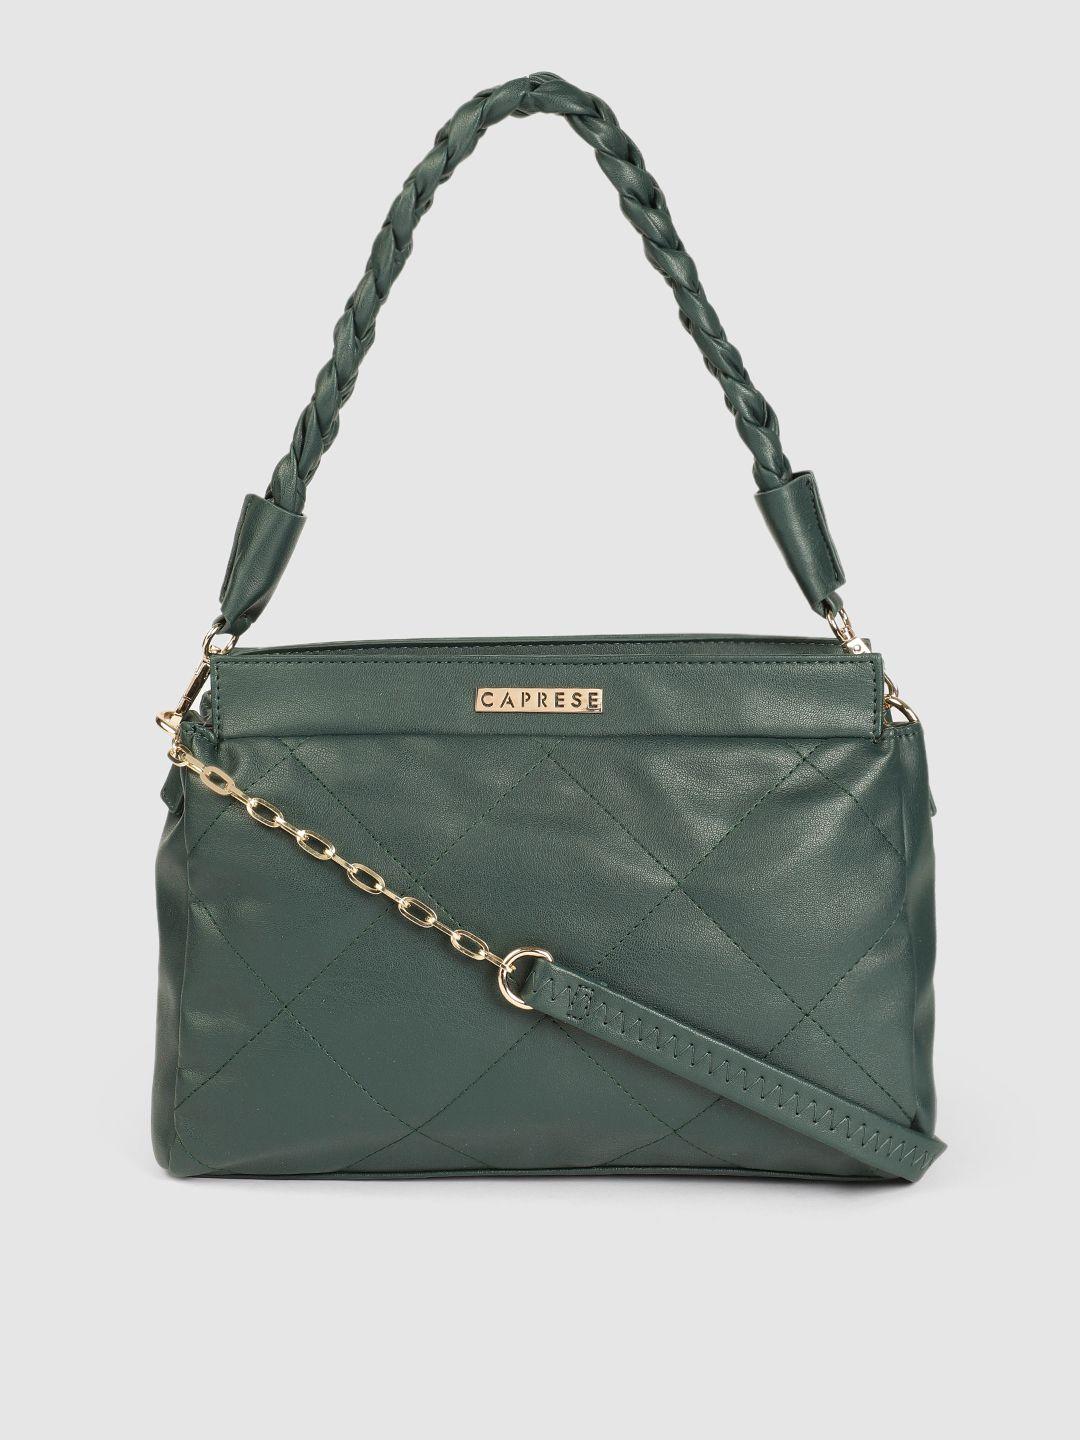 caprese teal green solid structured shoulder bag with quilted detail